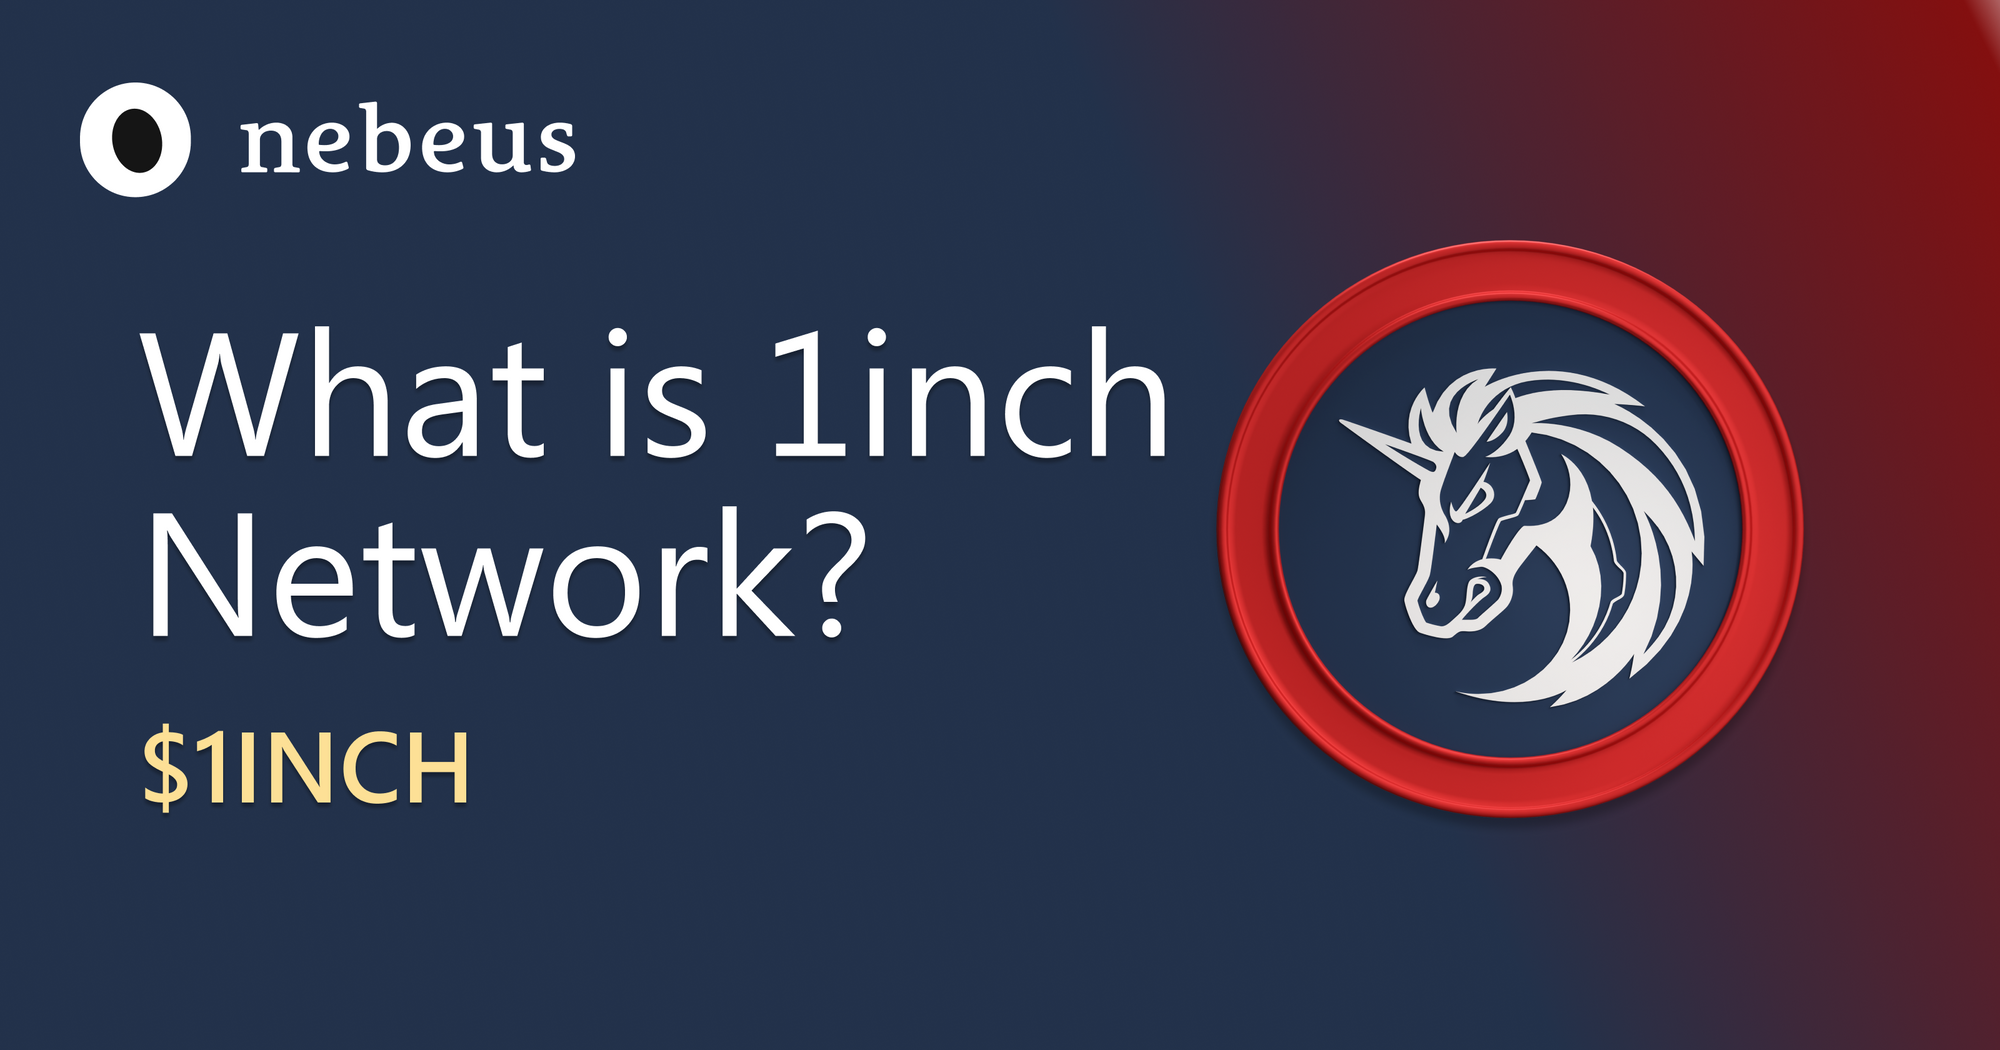 What is 1inch Network? $1INCH